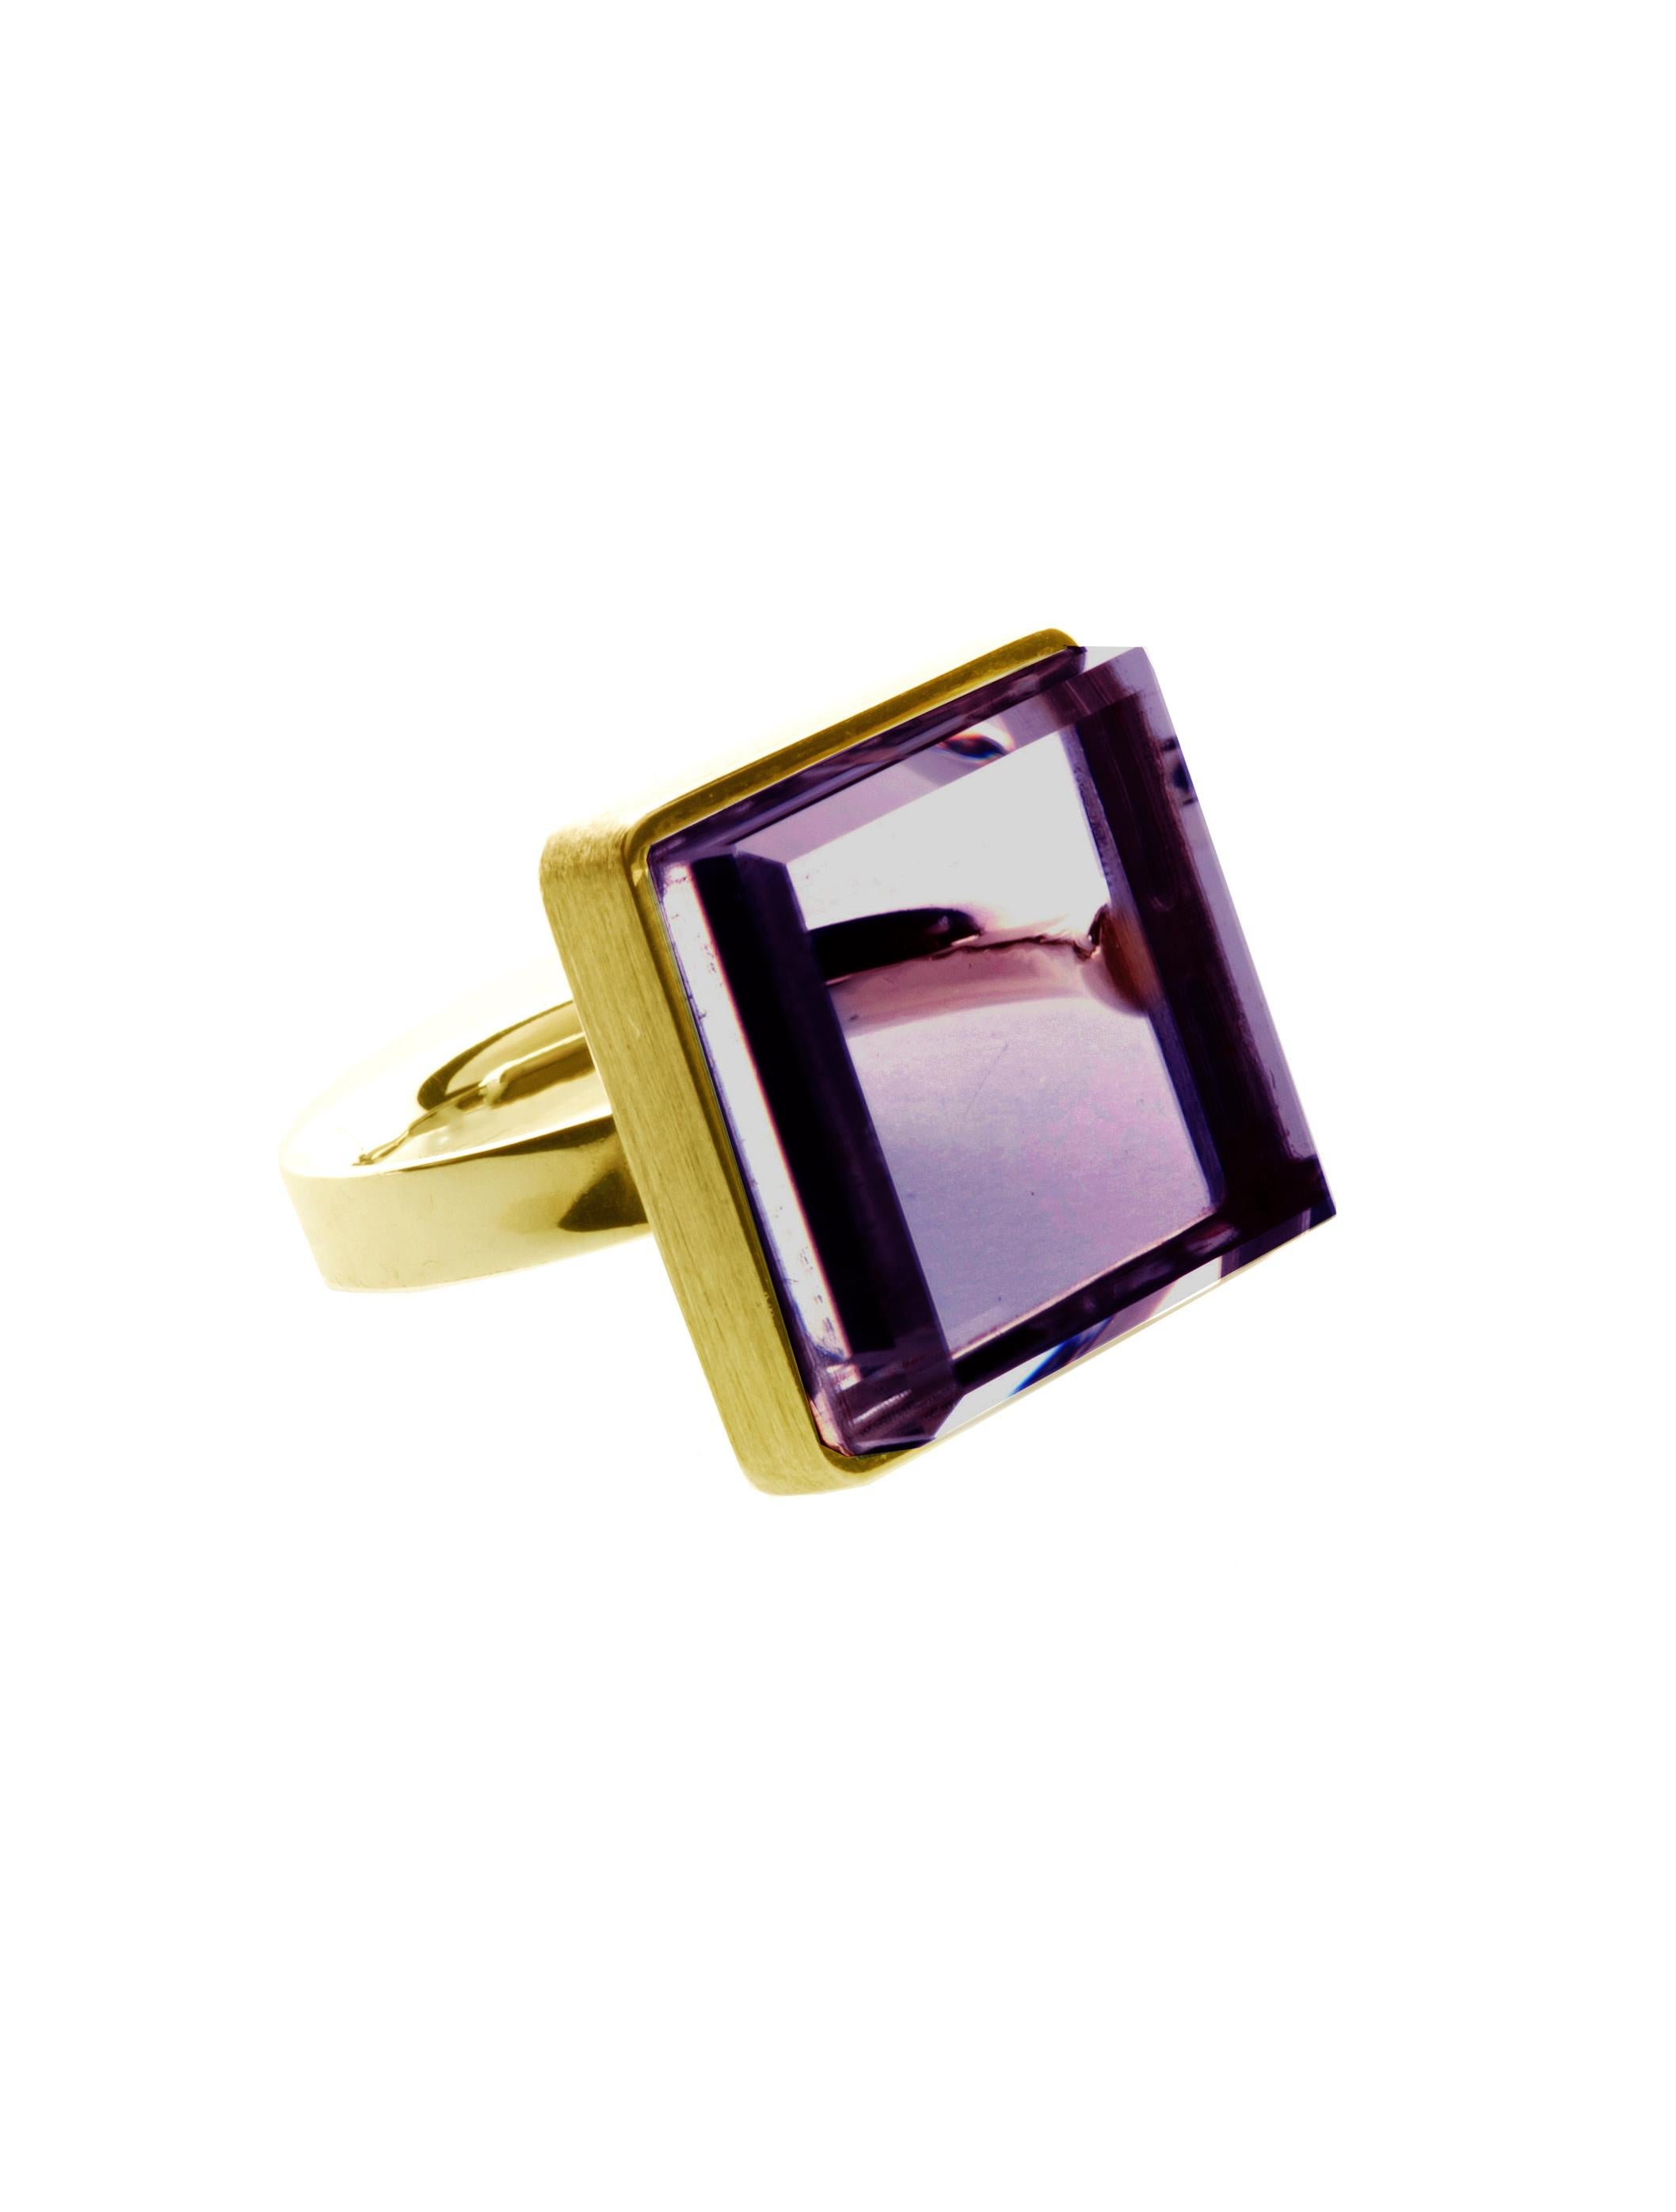 This captivating ring, crafted in 18 karat rose gold, showcases a stunning 15x15x8 mm amethyst at its center. Its remarkable design has garnered attention, being featured in renowned publications such as Harper's Bazaar and Vogue UA.

Embodying the